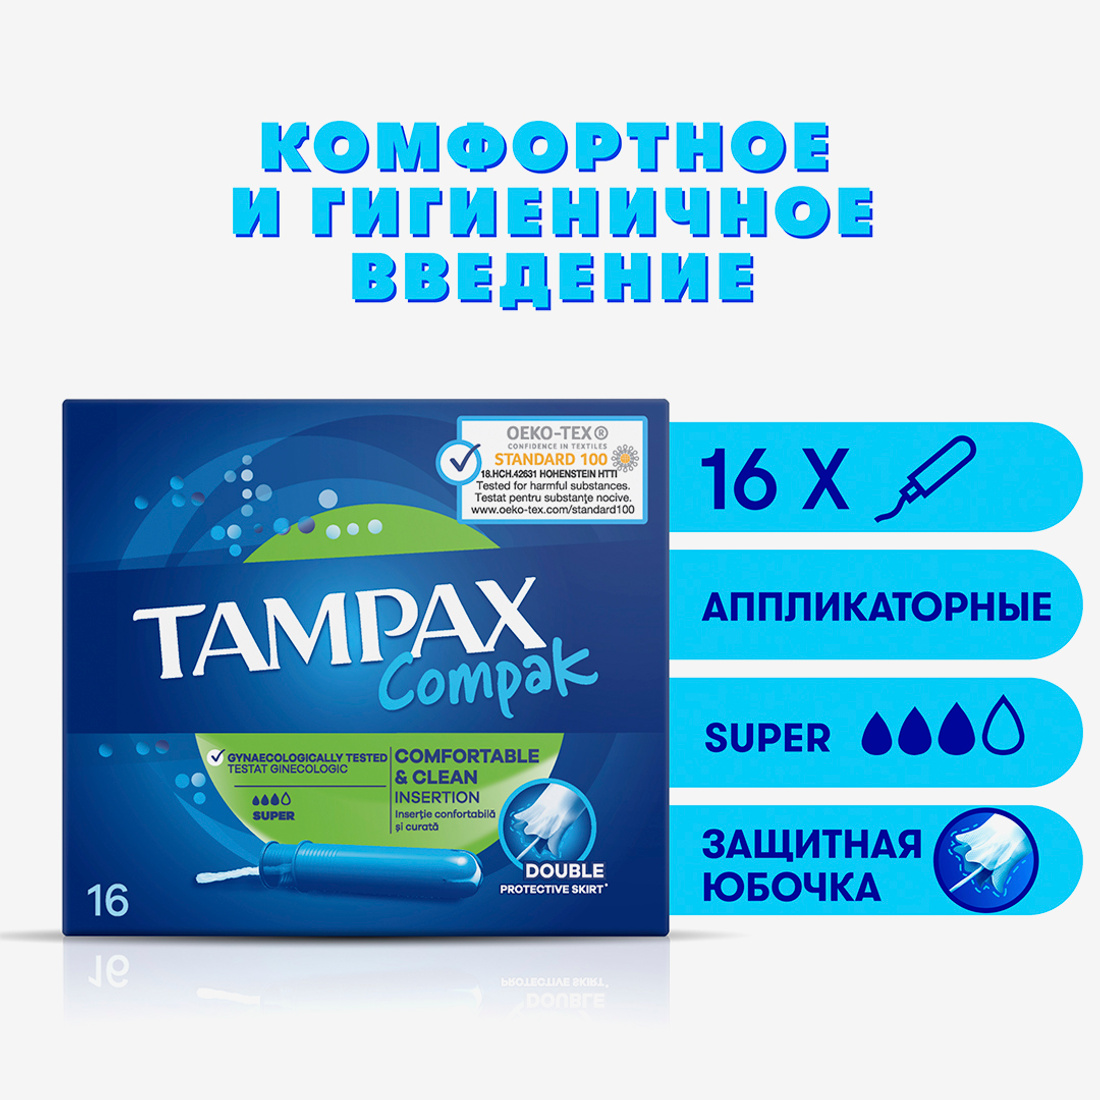 Tampax Compak Super Tampons with applicator